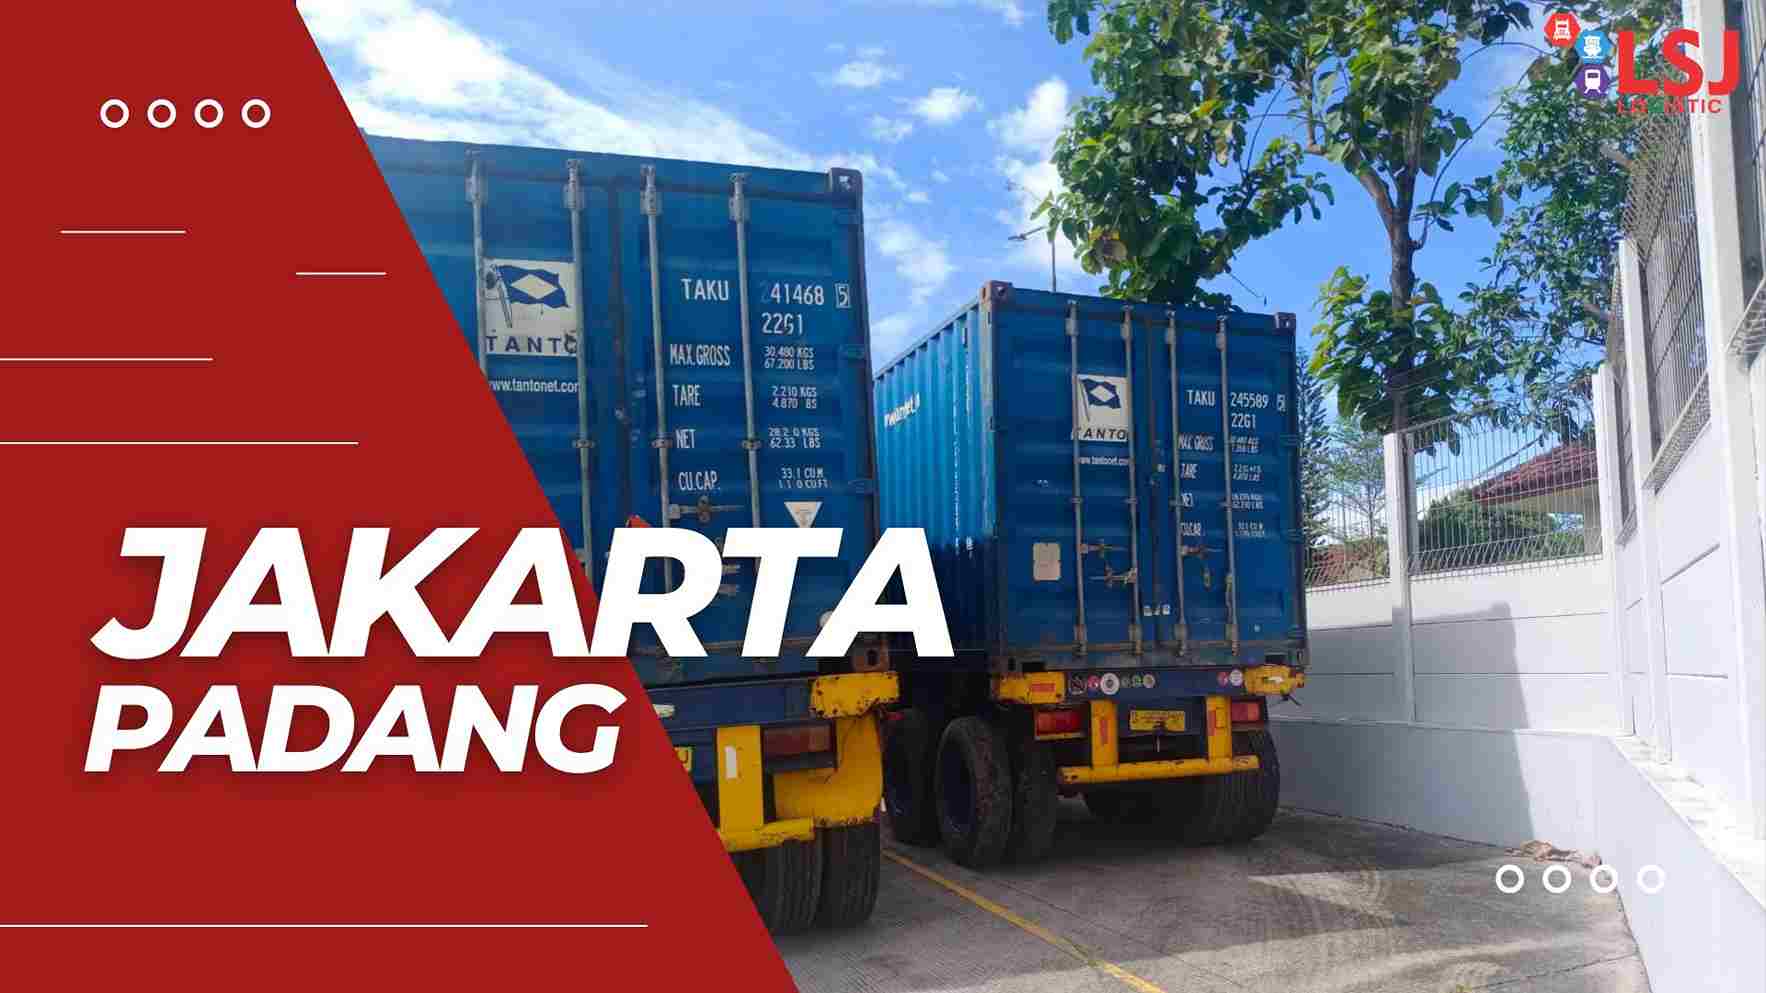 Cargo Container Jakarta Padang